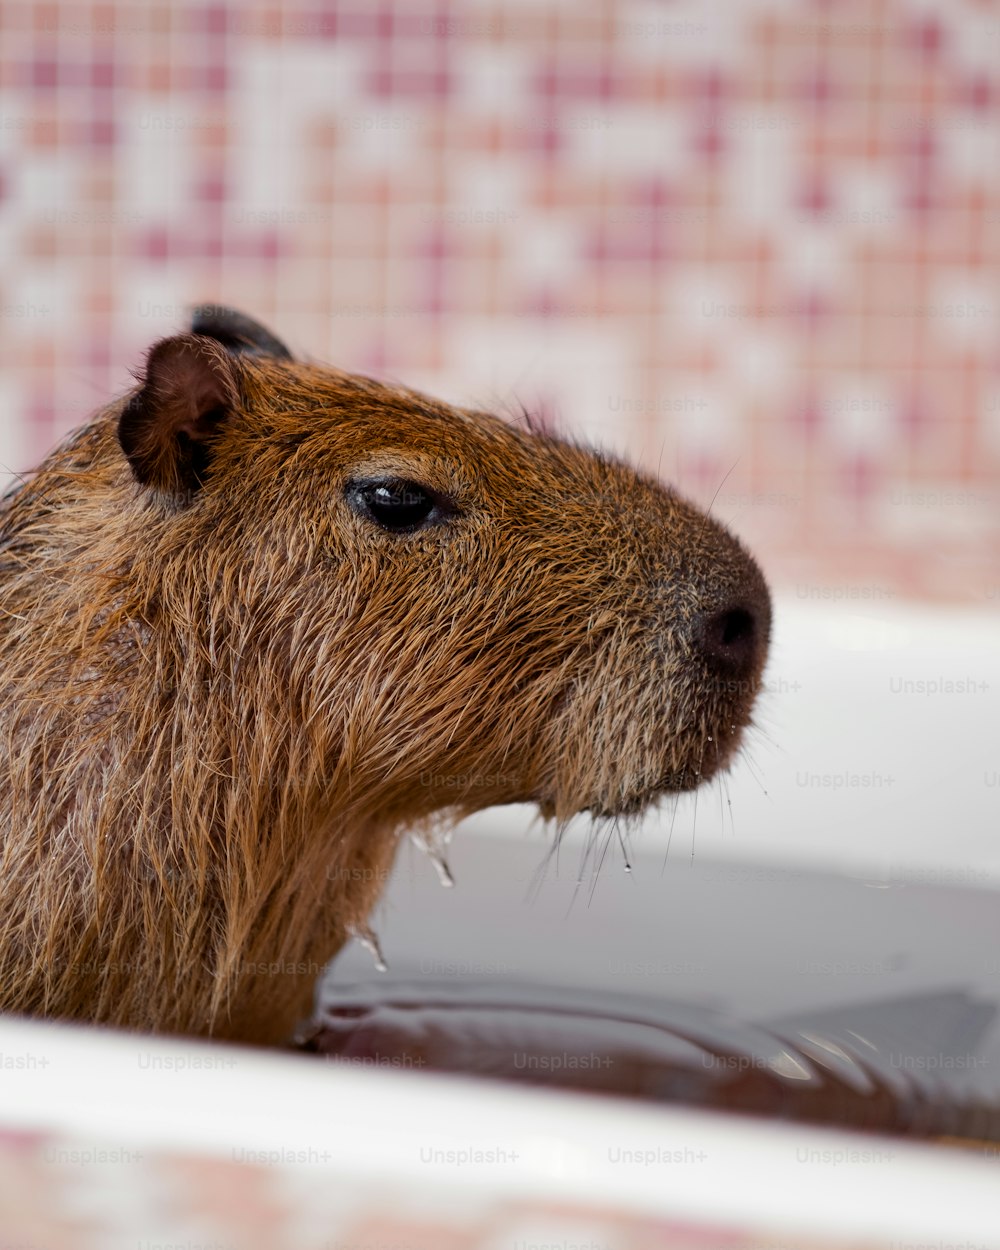 a close up of a rodent in a bathtub